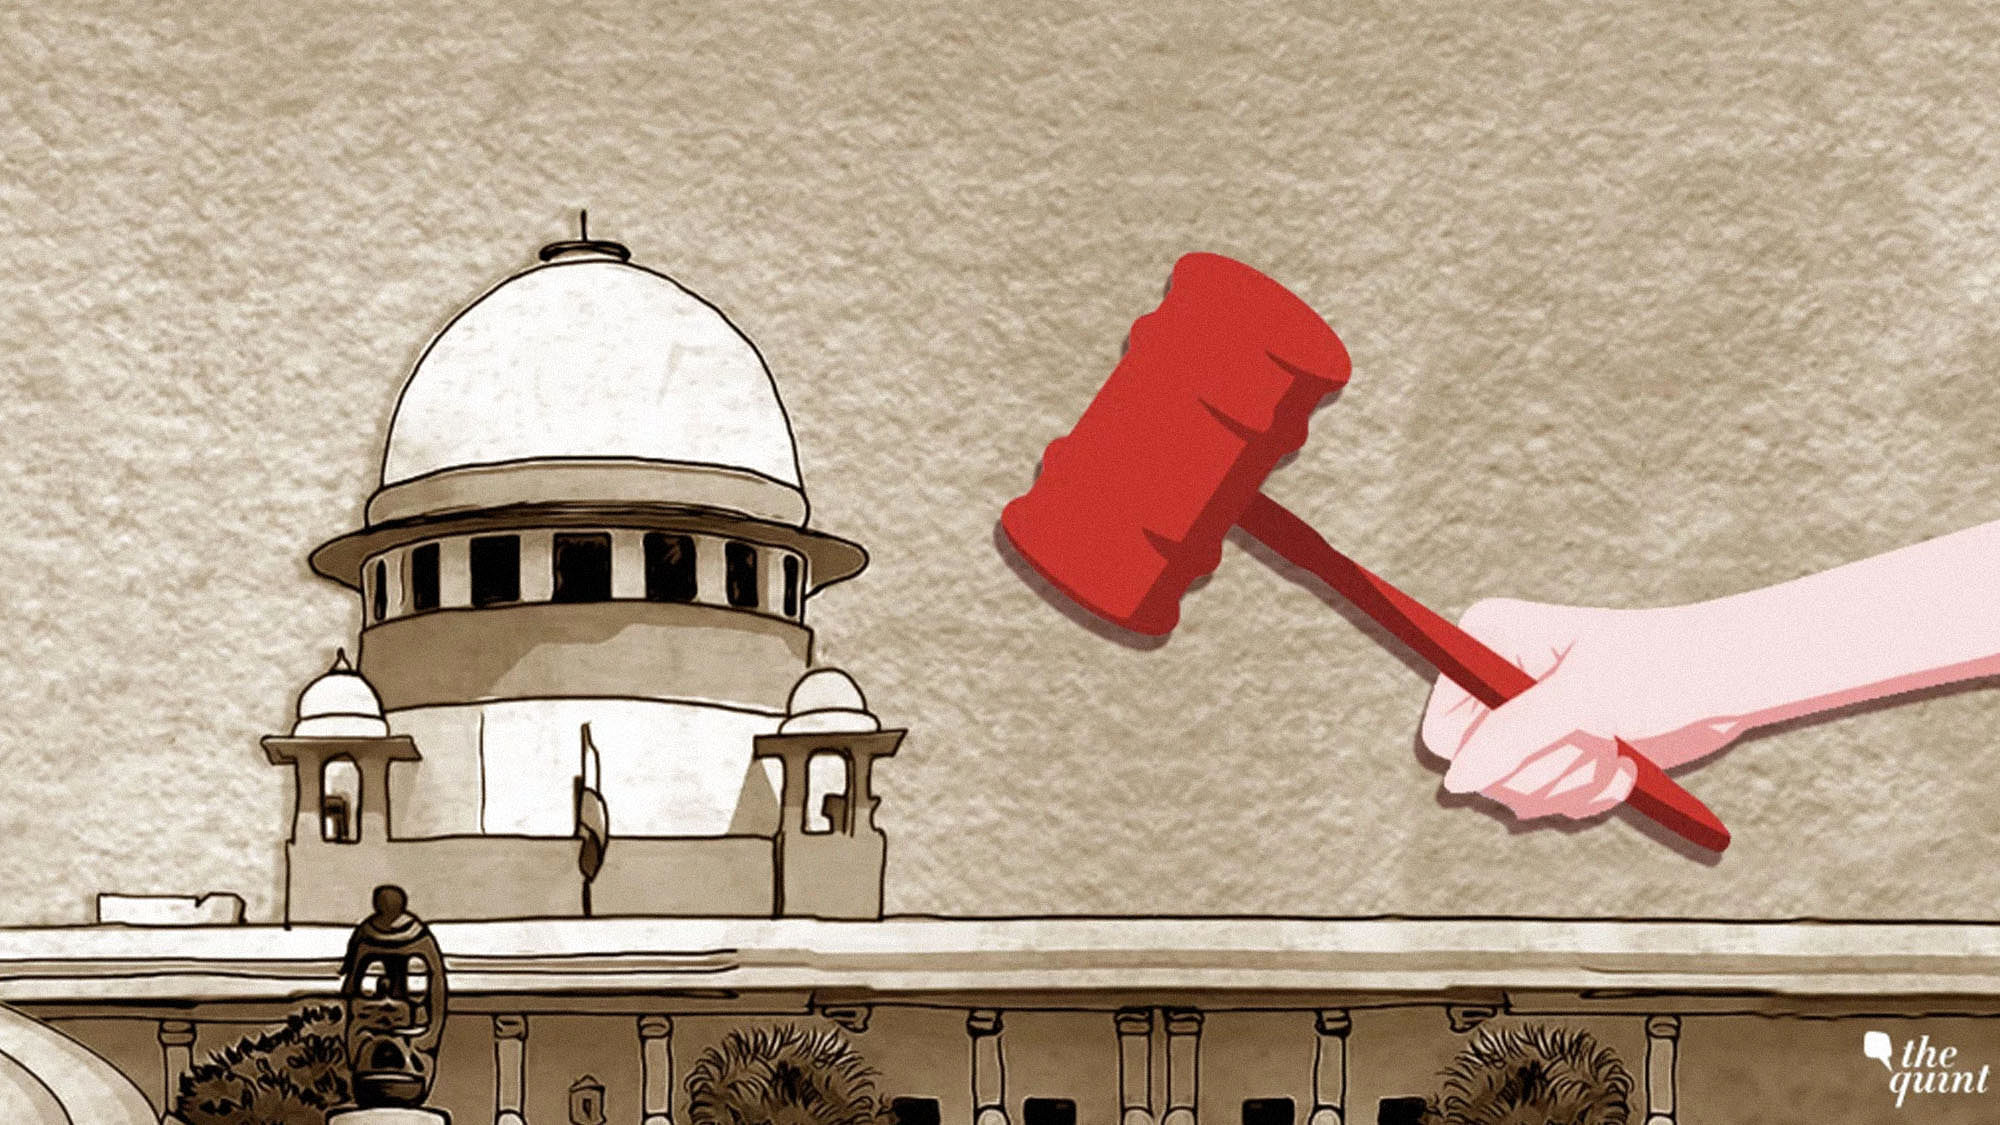 Image of Supreme Court used for representational purposes.